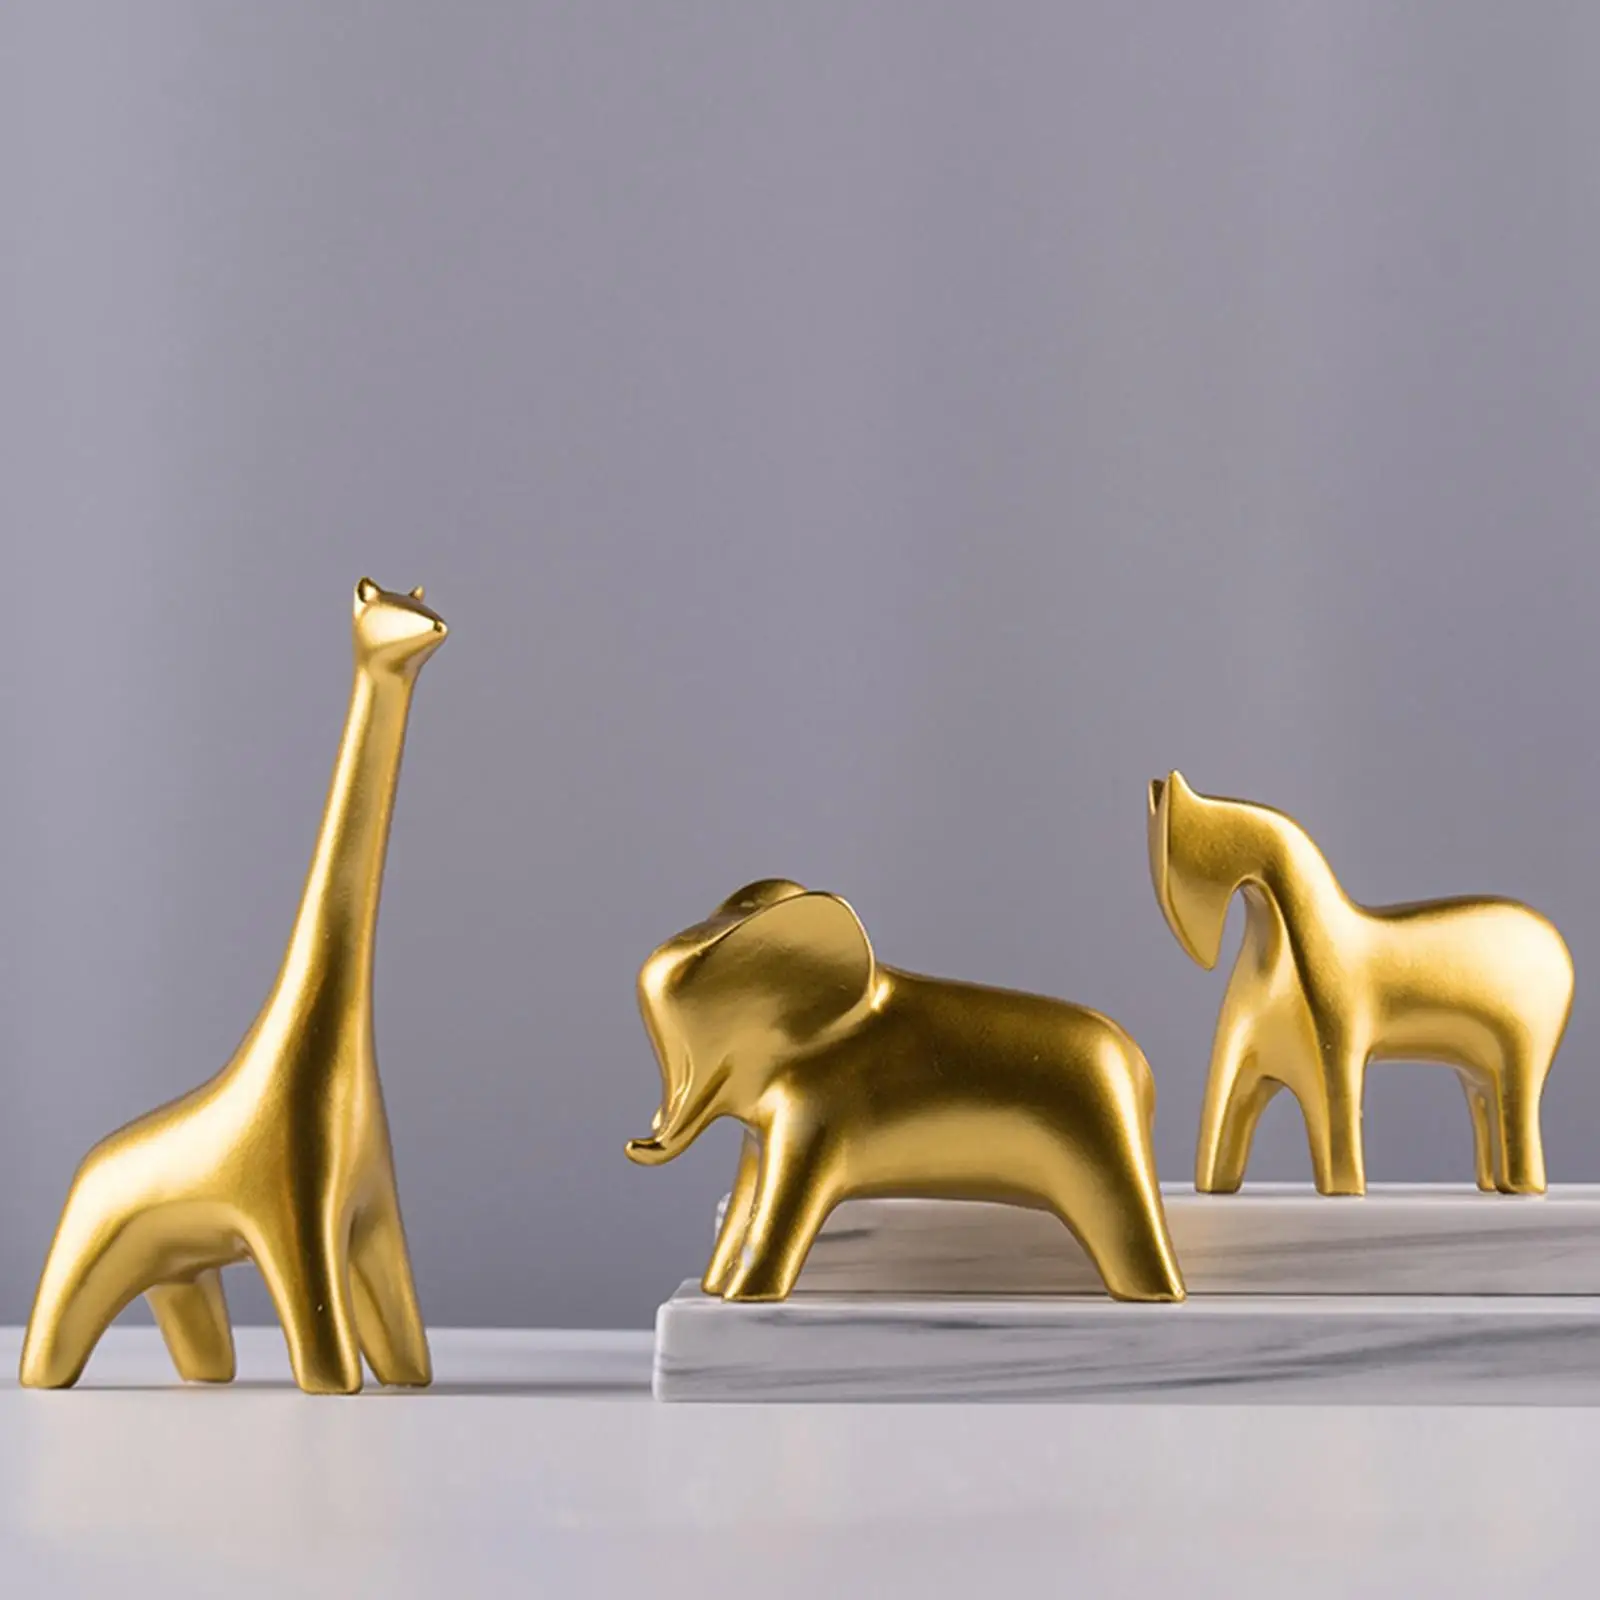 Resin Small Animal Statues Home Decor Modern Gold Figurines Sculpture for Office Cabinets Decor Display Ornaments Gifts